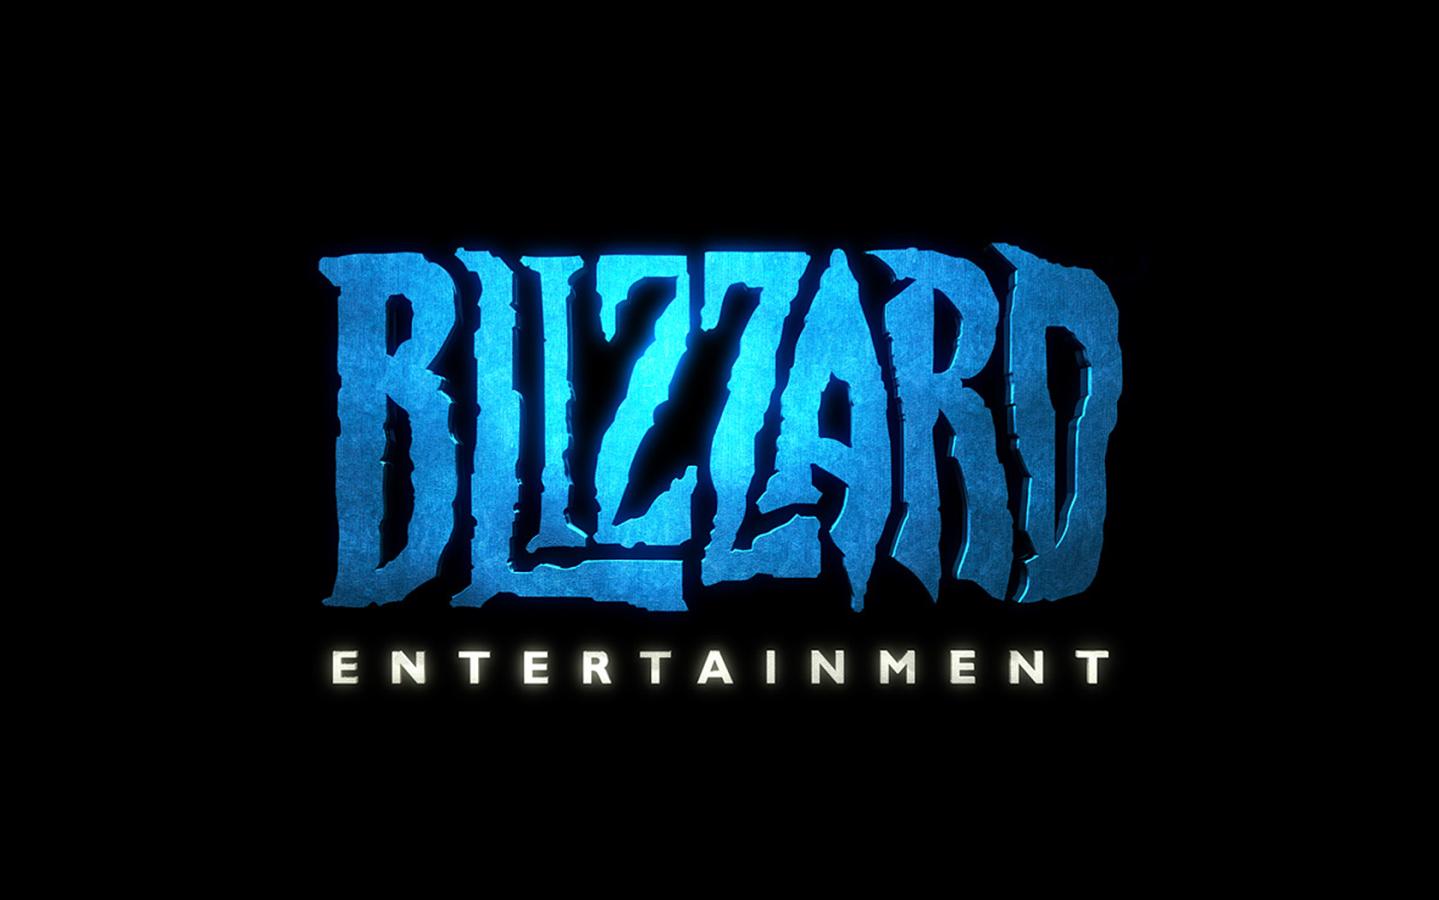 16 Blizzard accounts - receiving activation sms